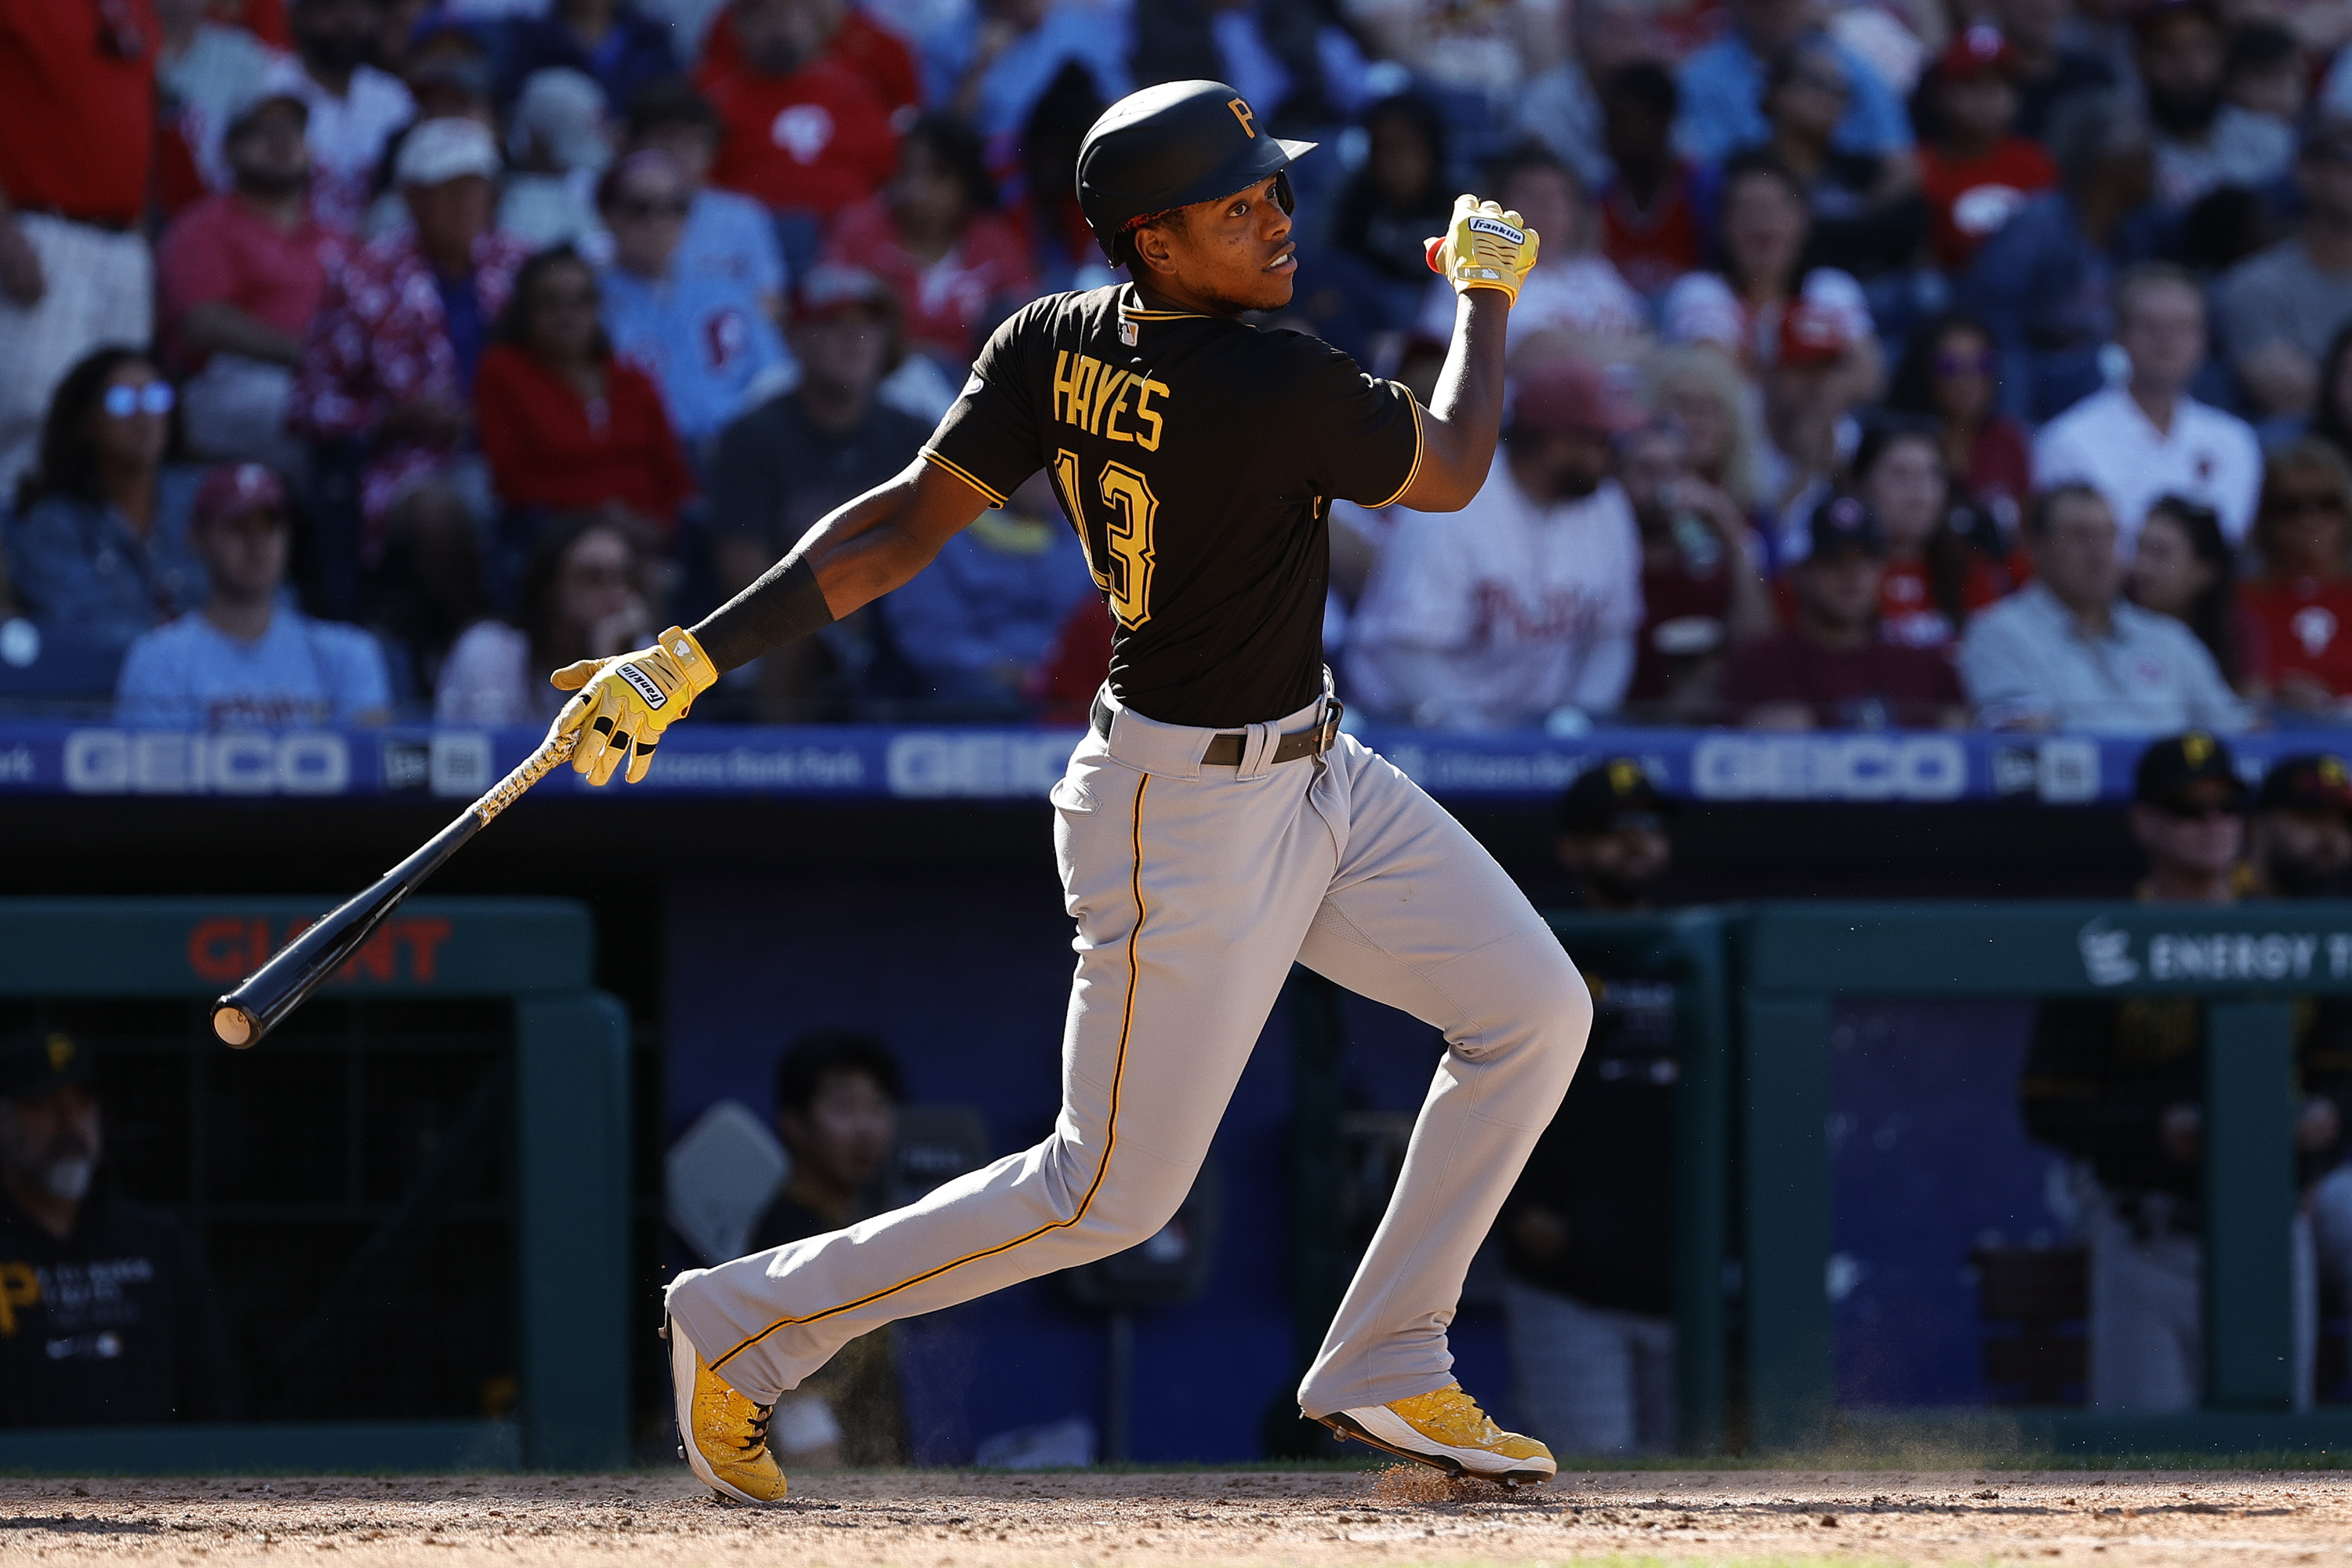 Ke’Bryan Hayes #13 of the Pittsburgh Pirates hits a two-RBI triple during the seventh inning against the Philadelphia Phillies at Citizens Bank Park on September 26, 2021 in Philadelphia, Pennsylvania.